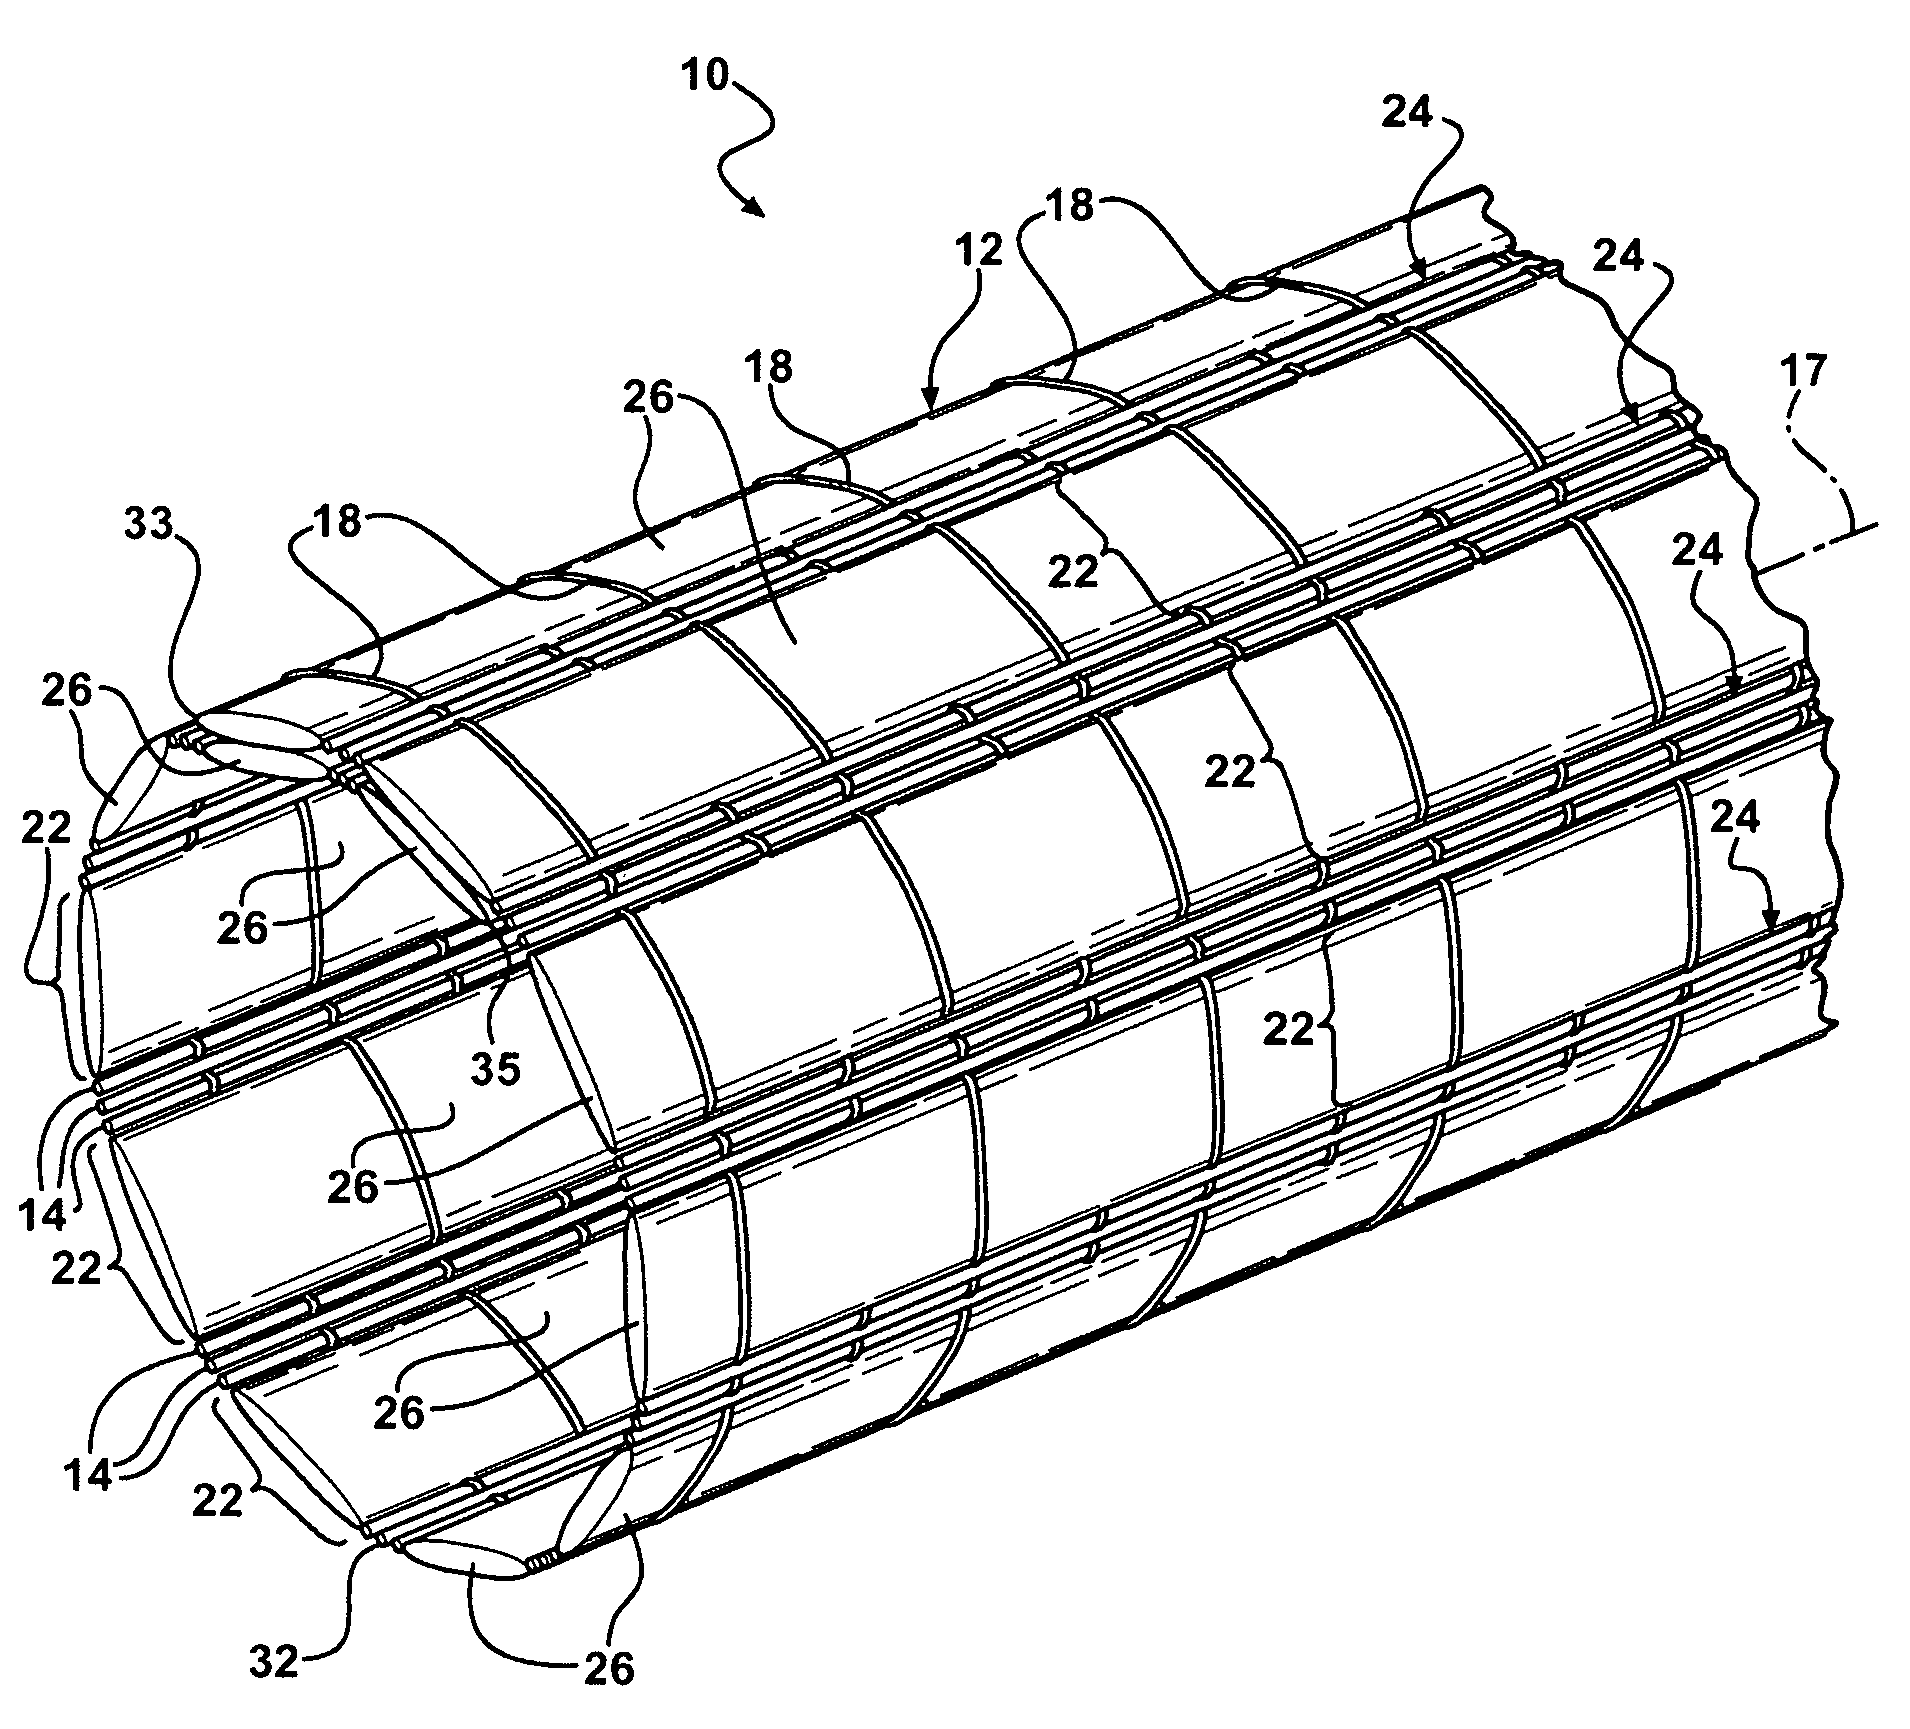 Fabric for end fray resistance and protective sleeves formed therewith and methods of construction